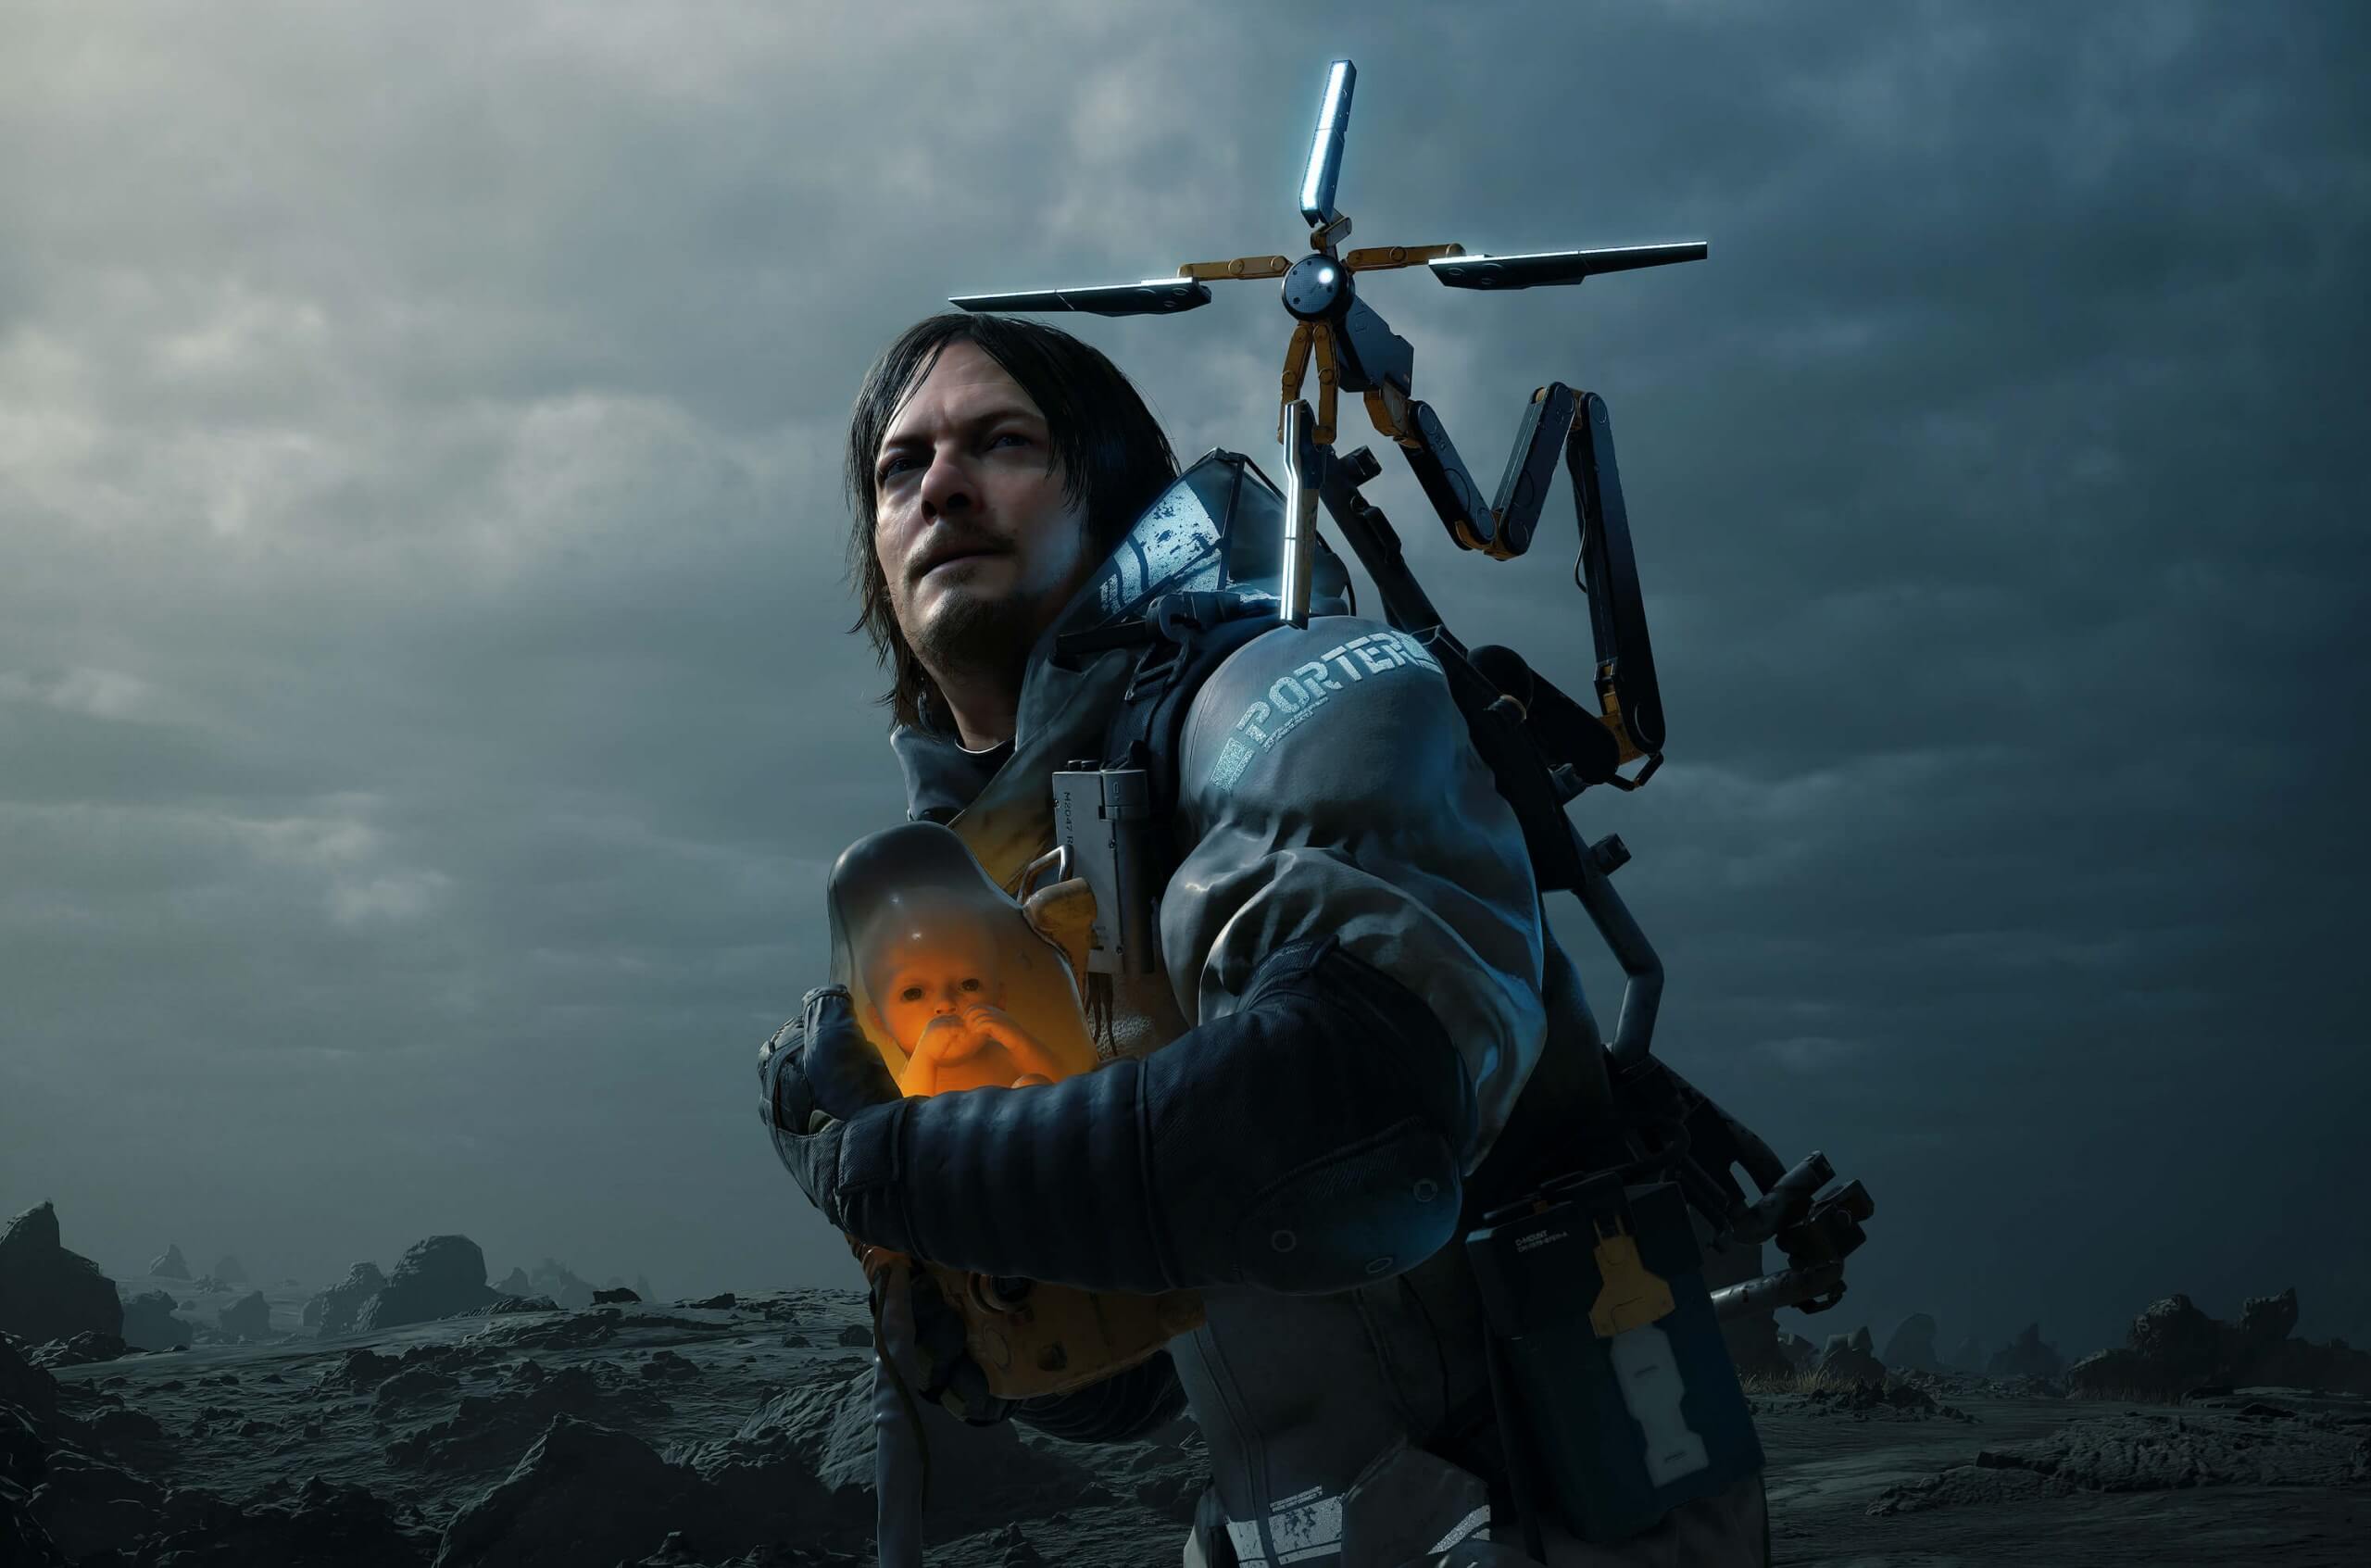 Check out Death Stranding on the PC with ultrawide monitor support